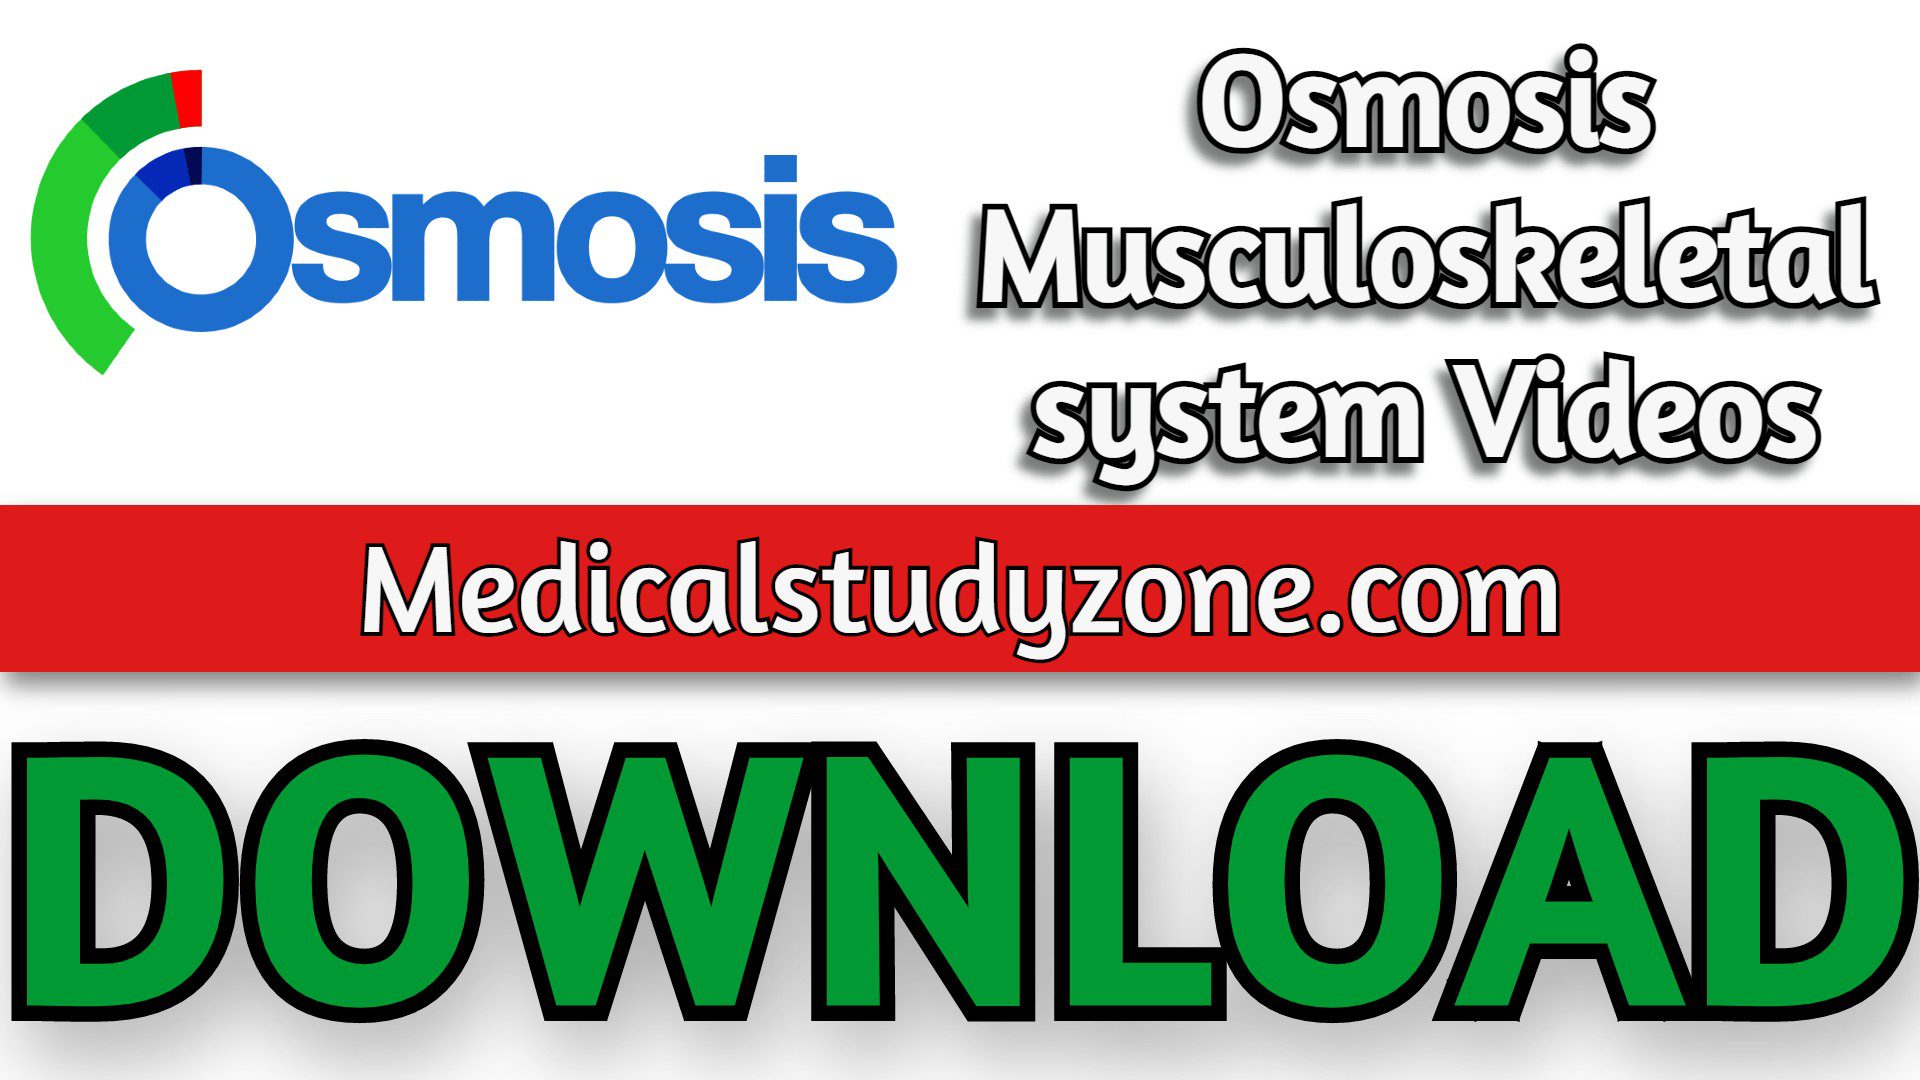 Osmosis Musculoskeletal system Videos 2021 Free Download